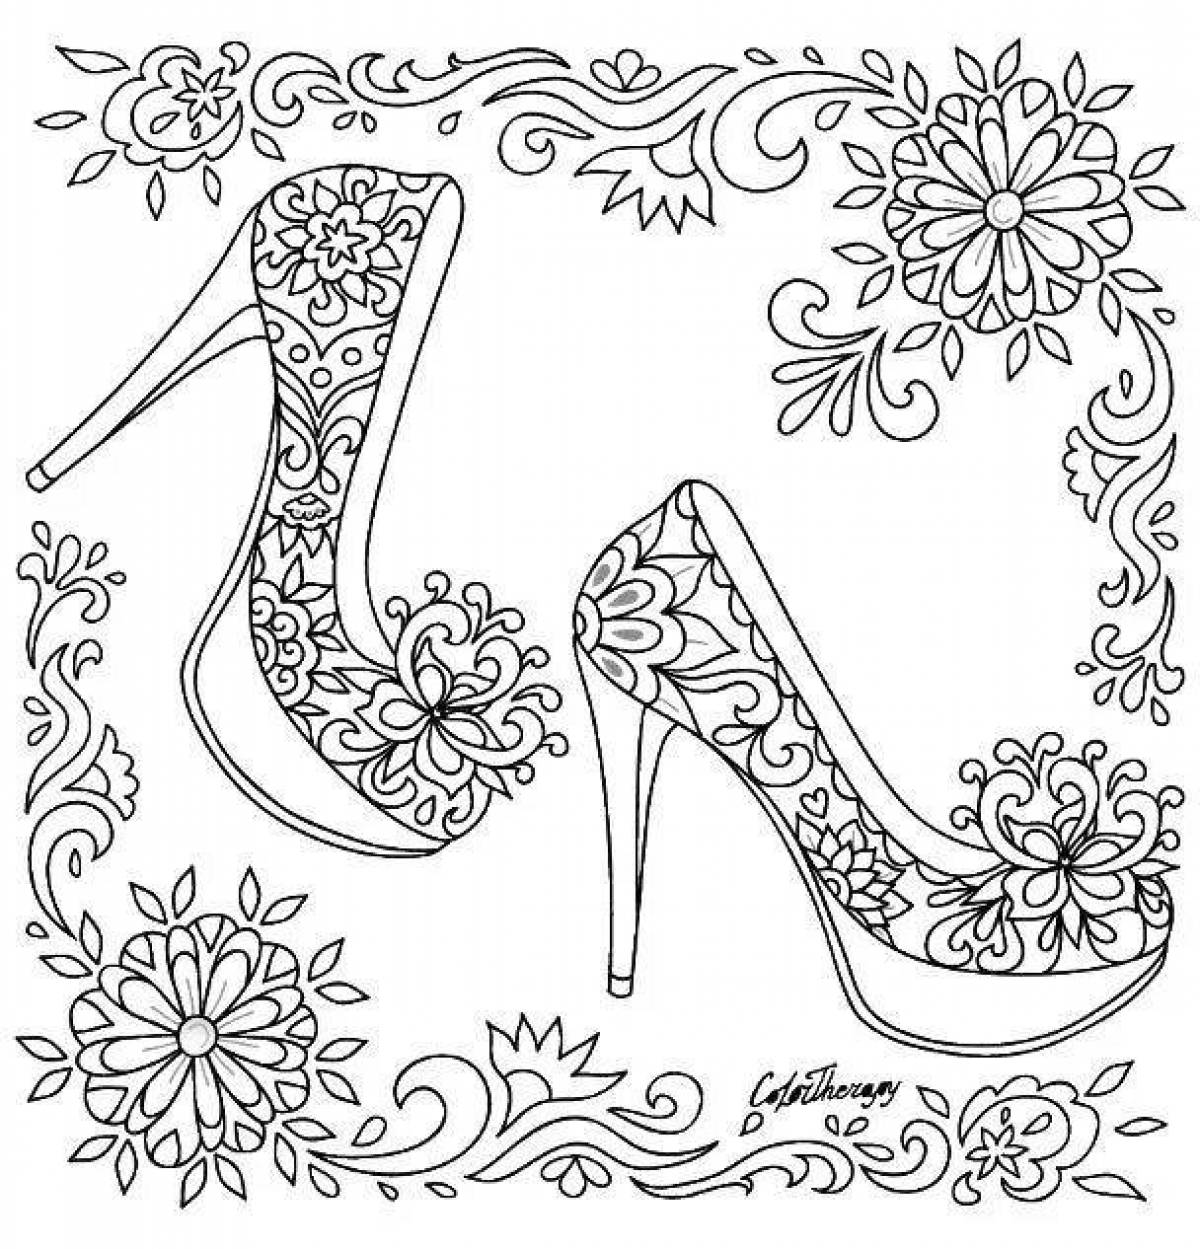 Coloring book cool shoes